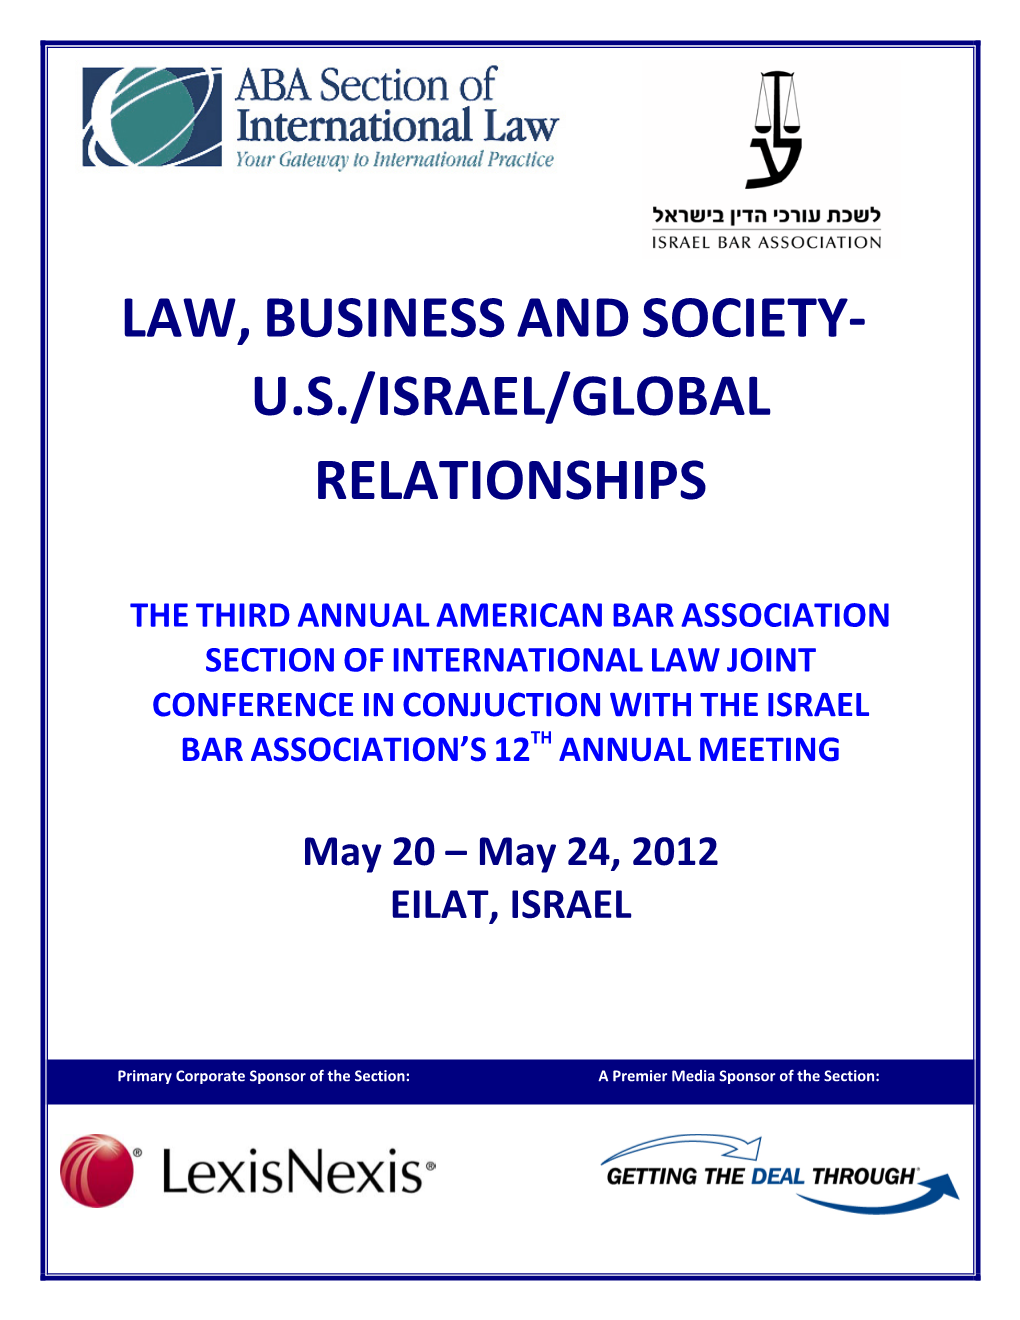 Israel Bar Association Joint Conference and Meeting